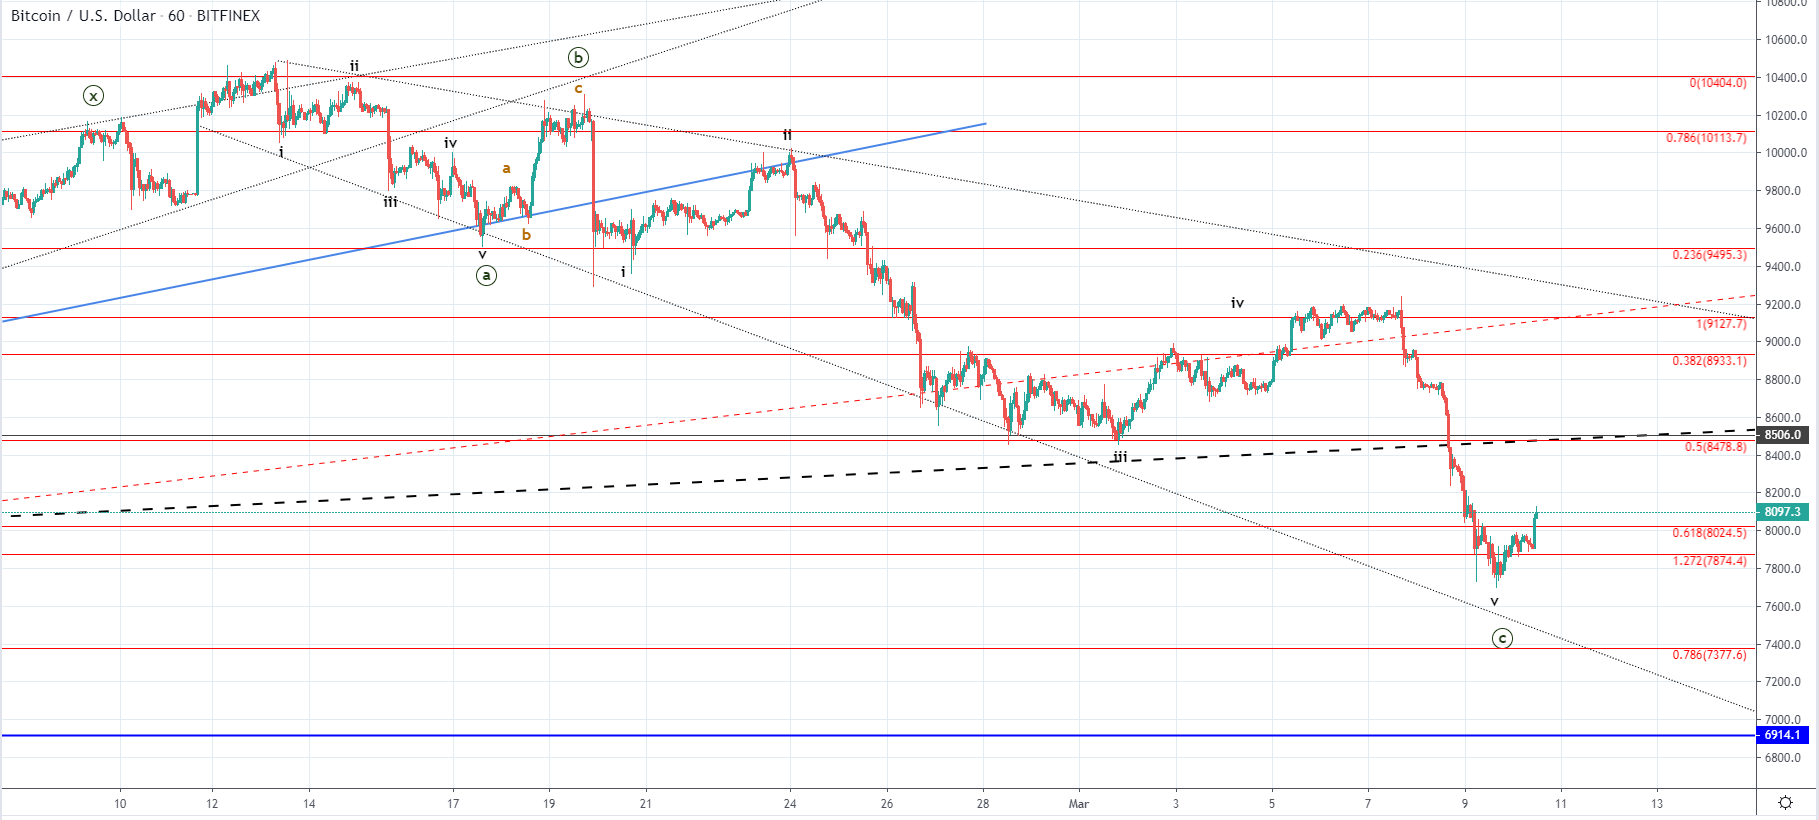 BTC and XRP - Correction likely ended